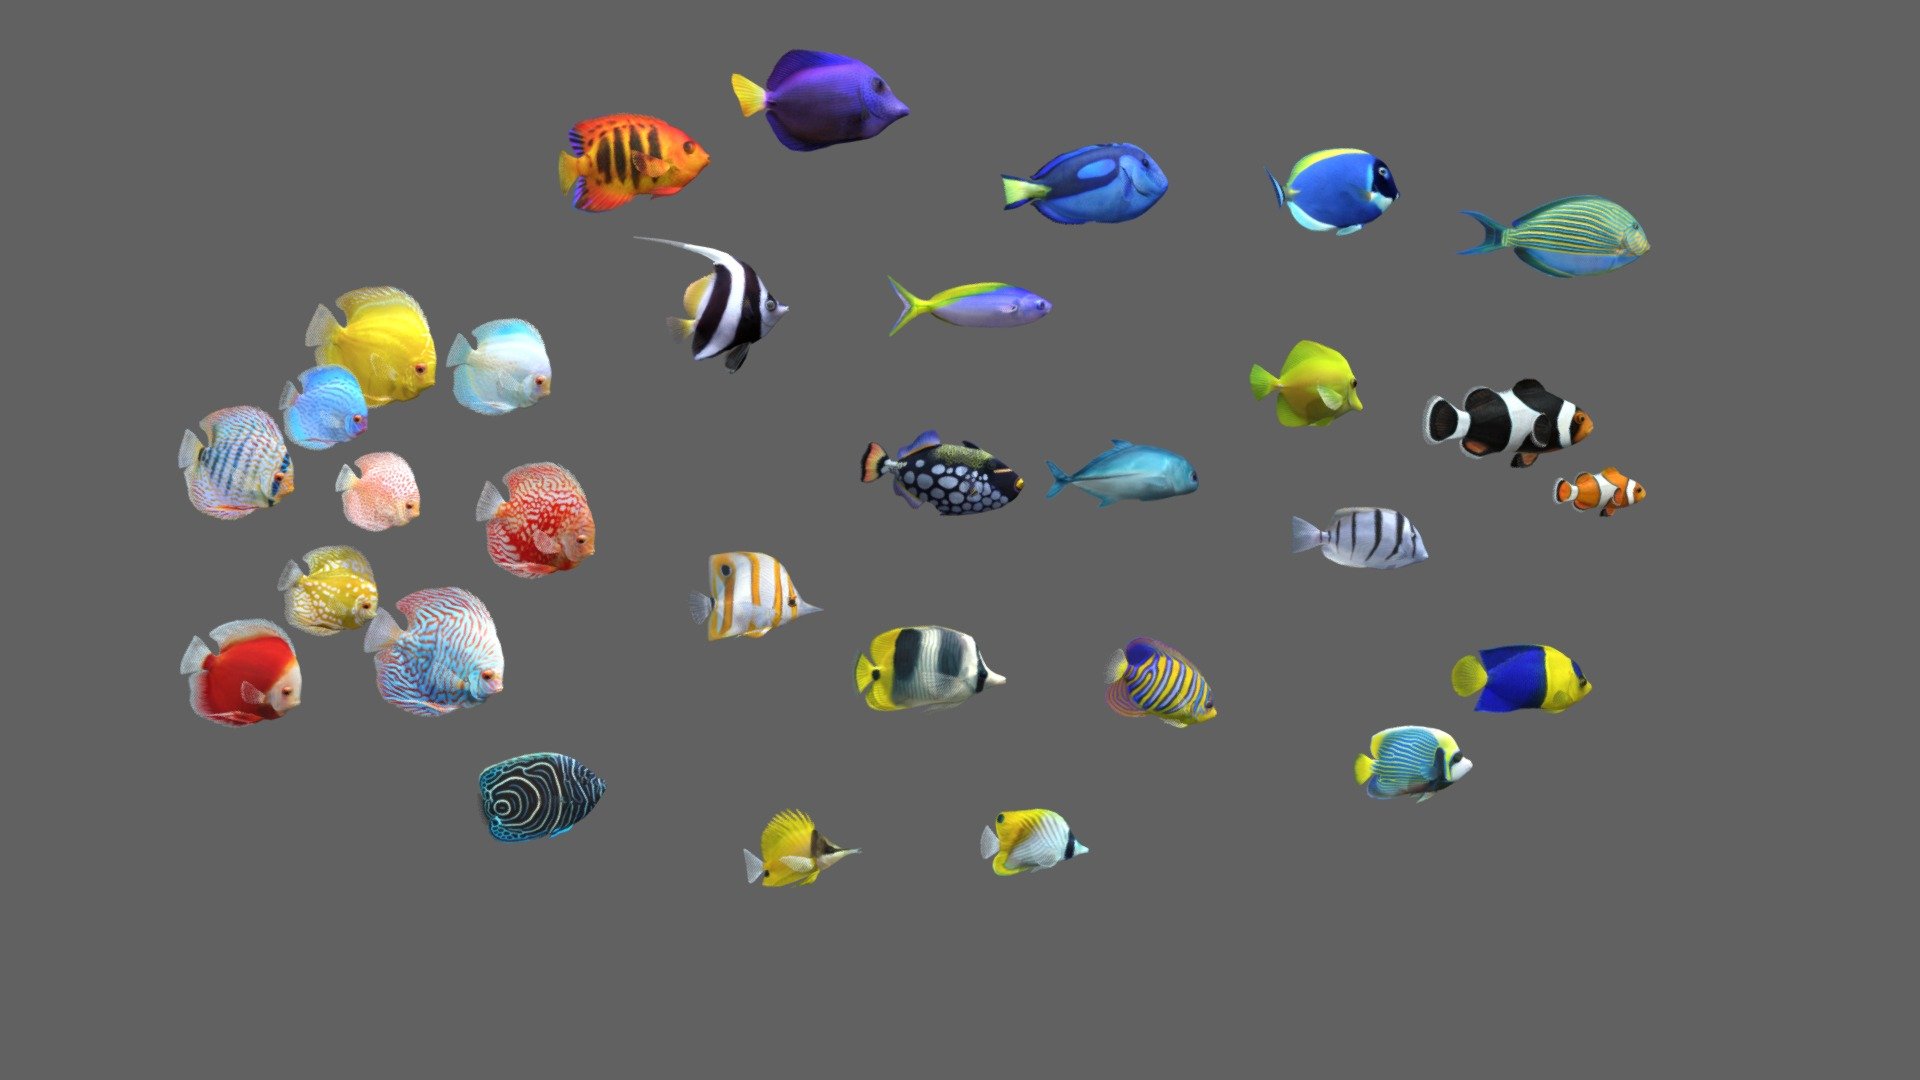 Before purchasing this model, you can free download Emperor Angelfish and try to import it. 

The pack includes 30 animated fish

Every fish has an animation loop

1 Clownfish

2 Double-Saddle 

3 Powder Blue Tang 

4 Yellow Tang 

5 Caranx fish 

6 Bannerfish 

7 Bicolor Angelfish

8 Clow Triggerfish

9 Convict Tang

10 Emperor Angelfish

11 Juvenile Angelfish

12 Royal Angelfish

13 Threadfin

14 Yellow Longnose

15 BlueTang

16 Purple Tang

17 Clownfish Black

18 Copperband

19 Lined Surgeon

20 Flame Angelfish

21 Fusilier

22 Discus Yellow Marlboro

23 Discus Albino Millennium Gold

24 Discus Albino Snakeskin

25 Discus Brilliant Turquoise

26 Discus Checkerboard Pigeon

27 Discus Heckel Cross

28 Discus Leopard Red Spotted

29 Discus Red Passion

30 Discus Red Map Checkerboard - Fish Pack 30 - Coral Bay - Buy Royalty Free 3D model by CGSoul 3d model